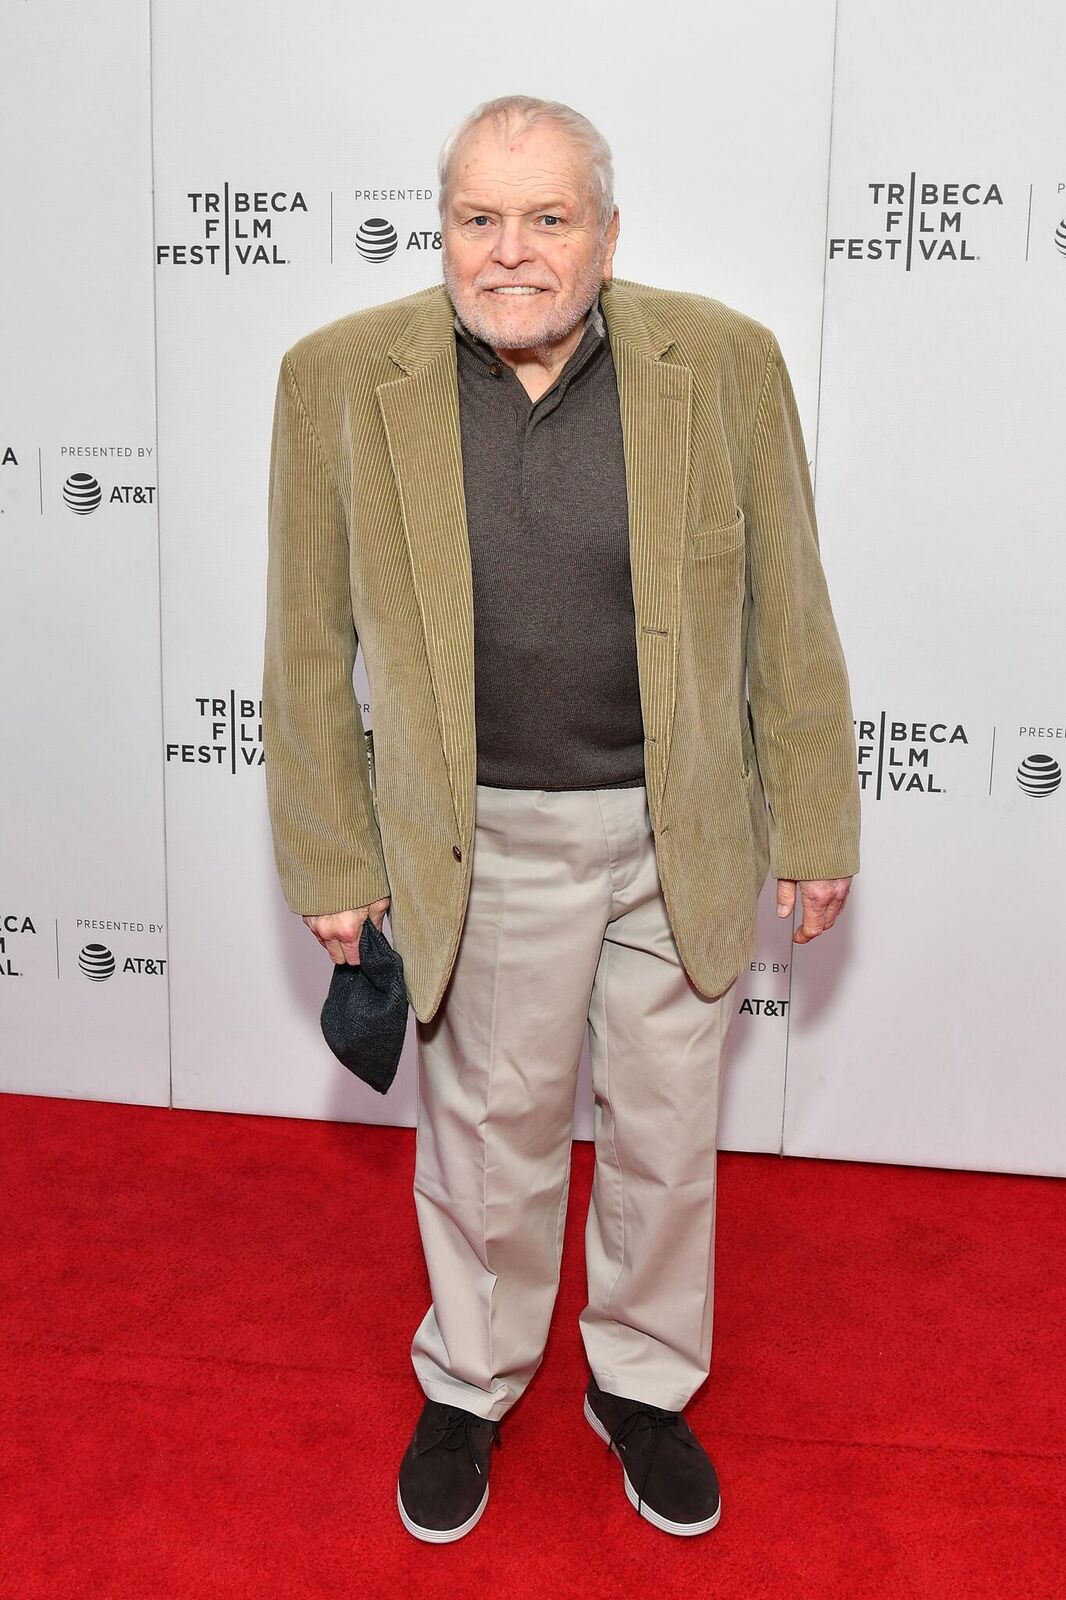 Brian Dennehy attends the "Driveways" screening during the 2019 Tribeca Film Festival at Village East Cinema on April 30, 2019 | Photo: Getty Images